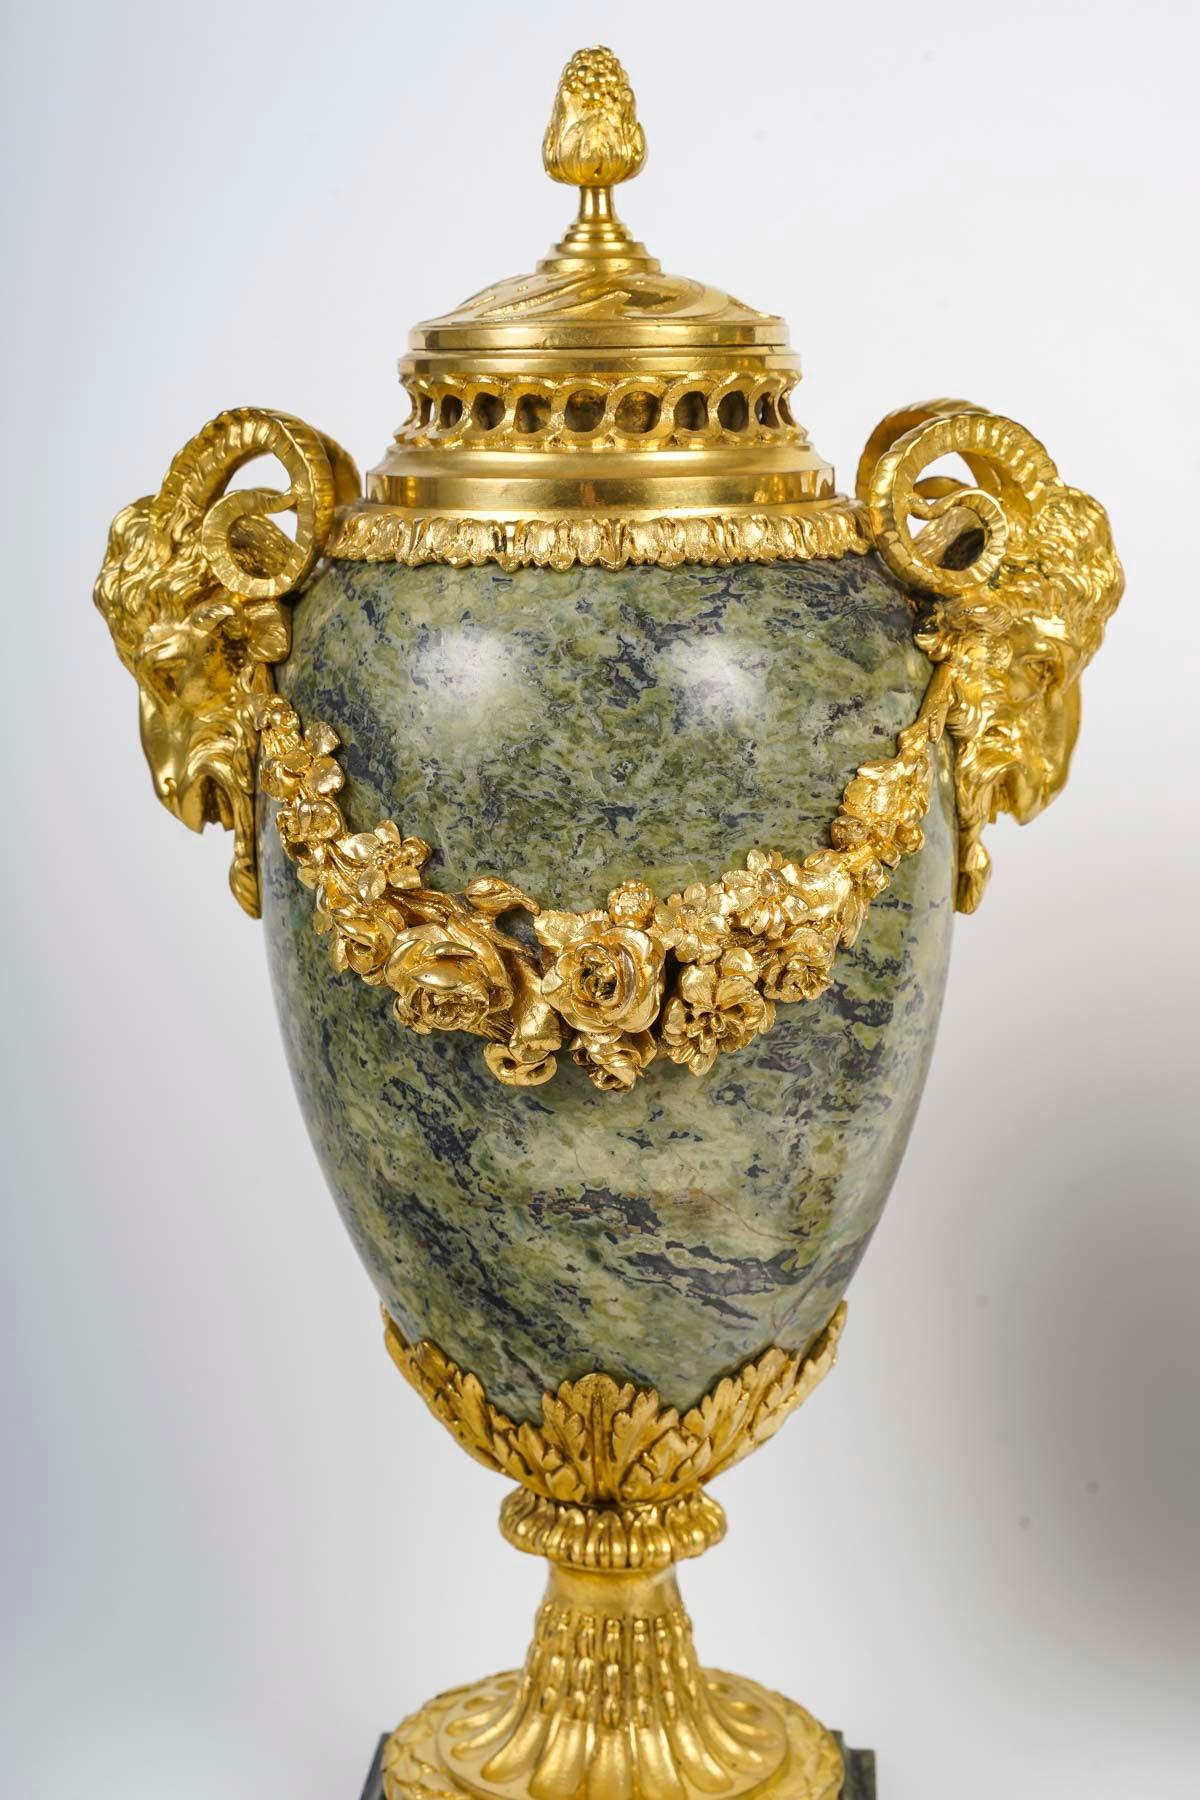 Pair of 19th century gilt bronze and marble incense burners.

Pair of 19th century incense burners, Napoleon III period, gilt bronze and marble.
h: 42cm, w: 24cm, d: 20cm